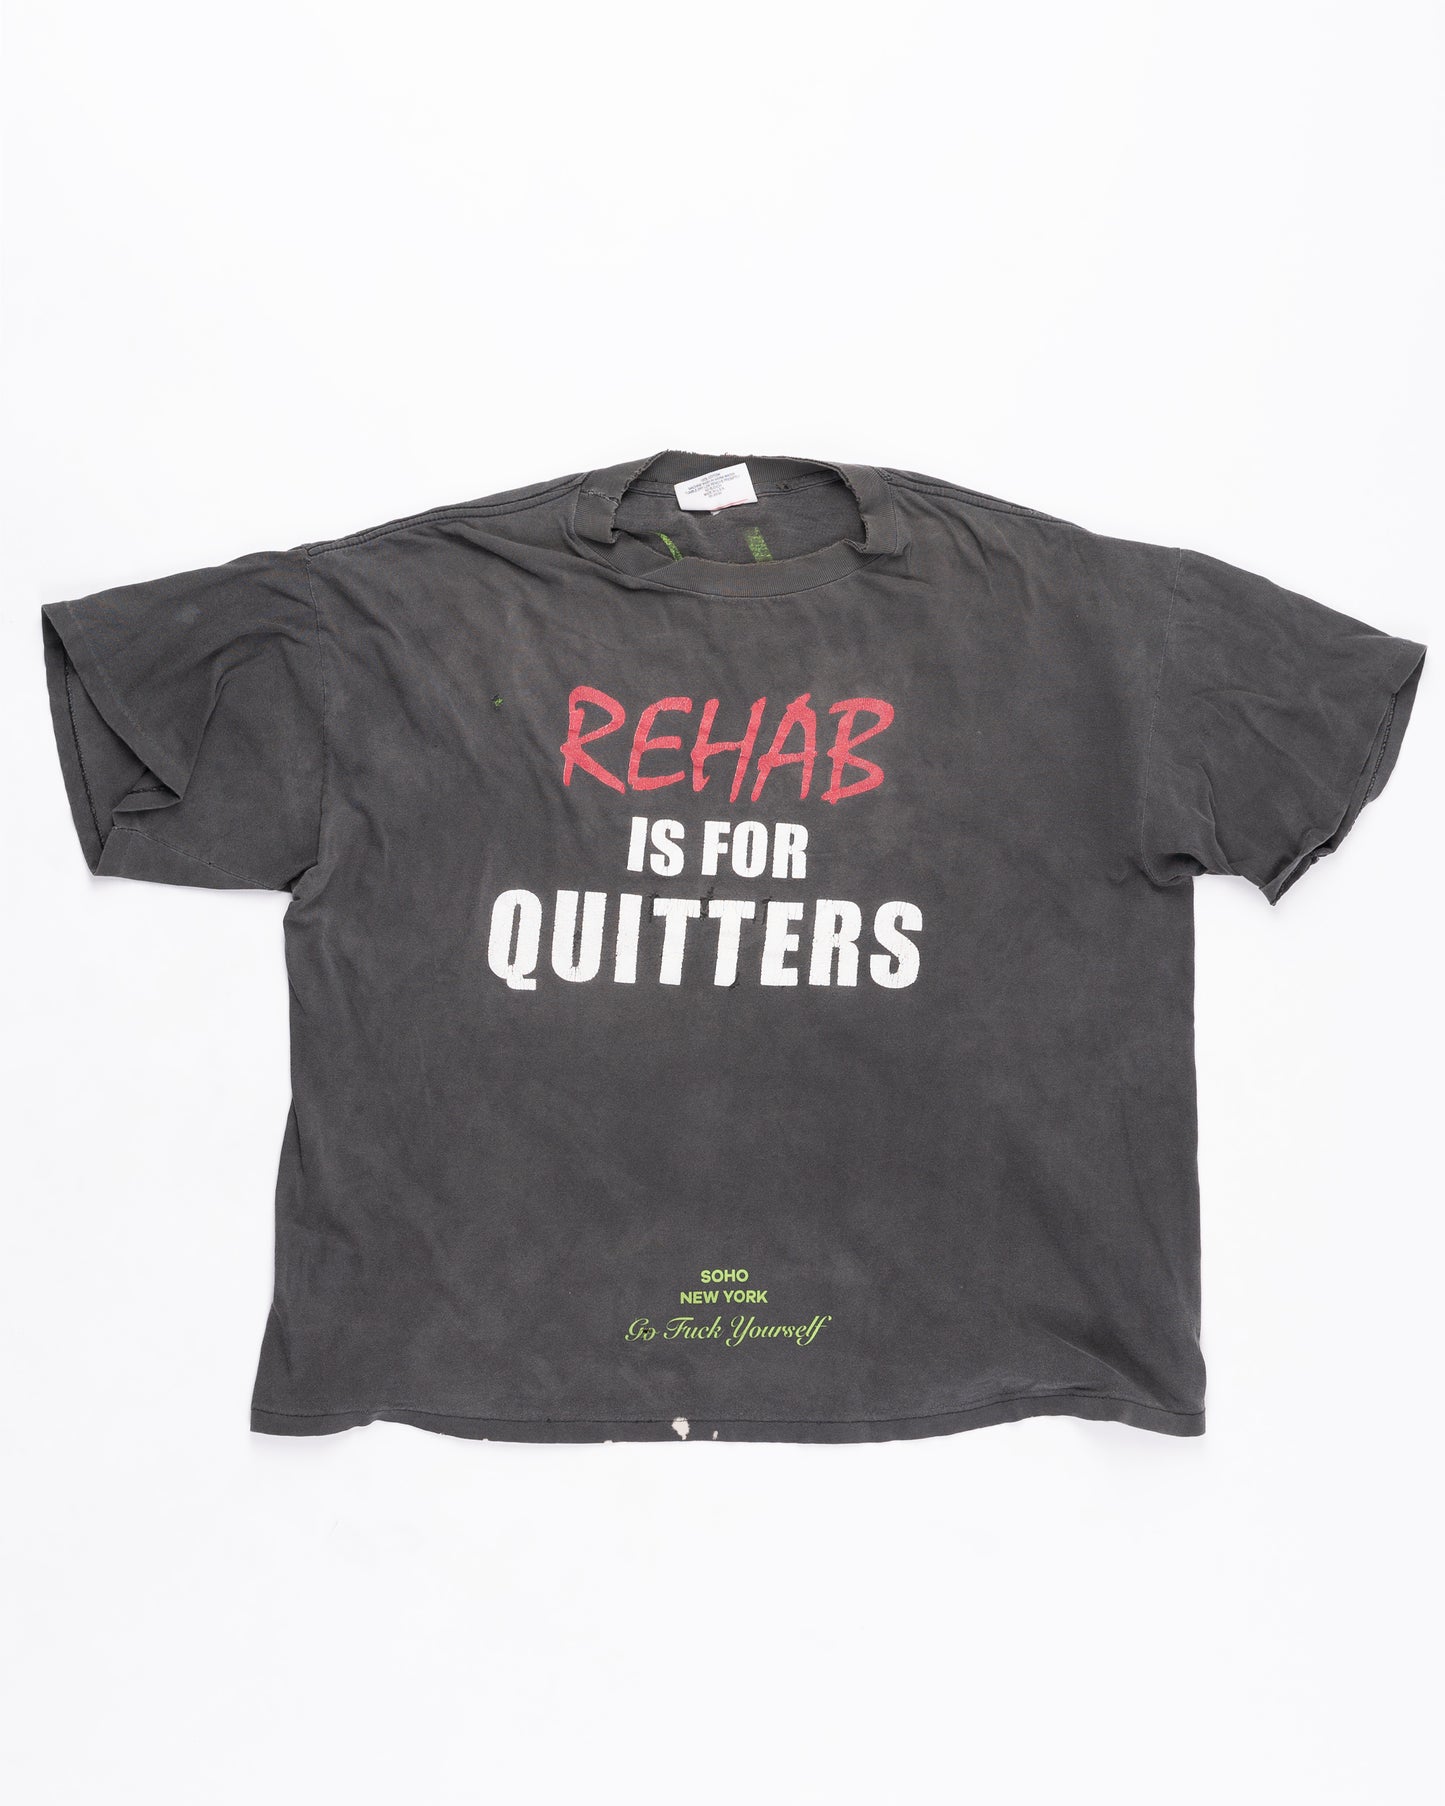 Rehab is For Quitters T-Shirt Size: XLarge